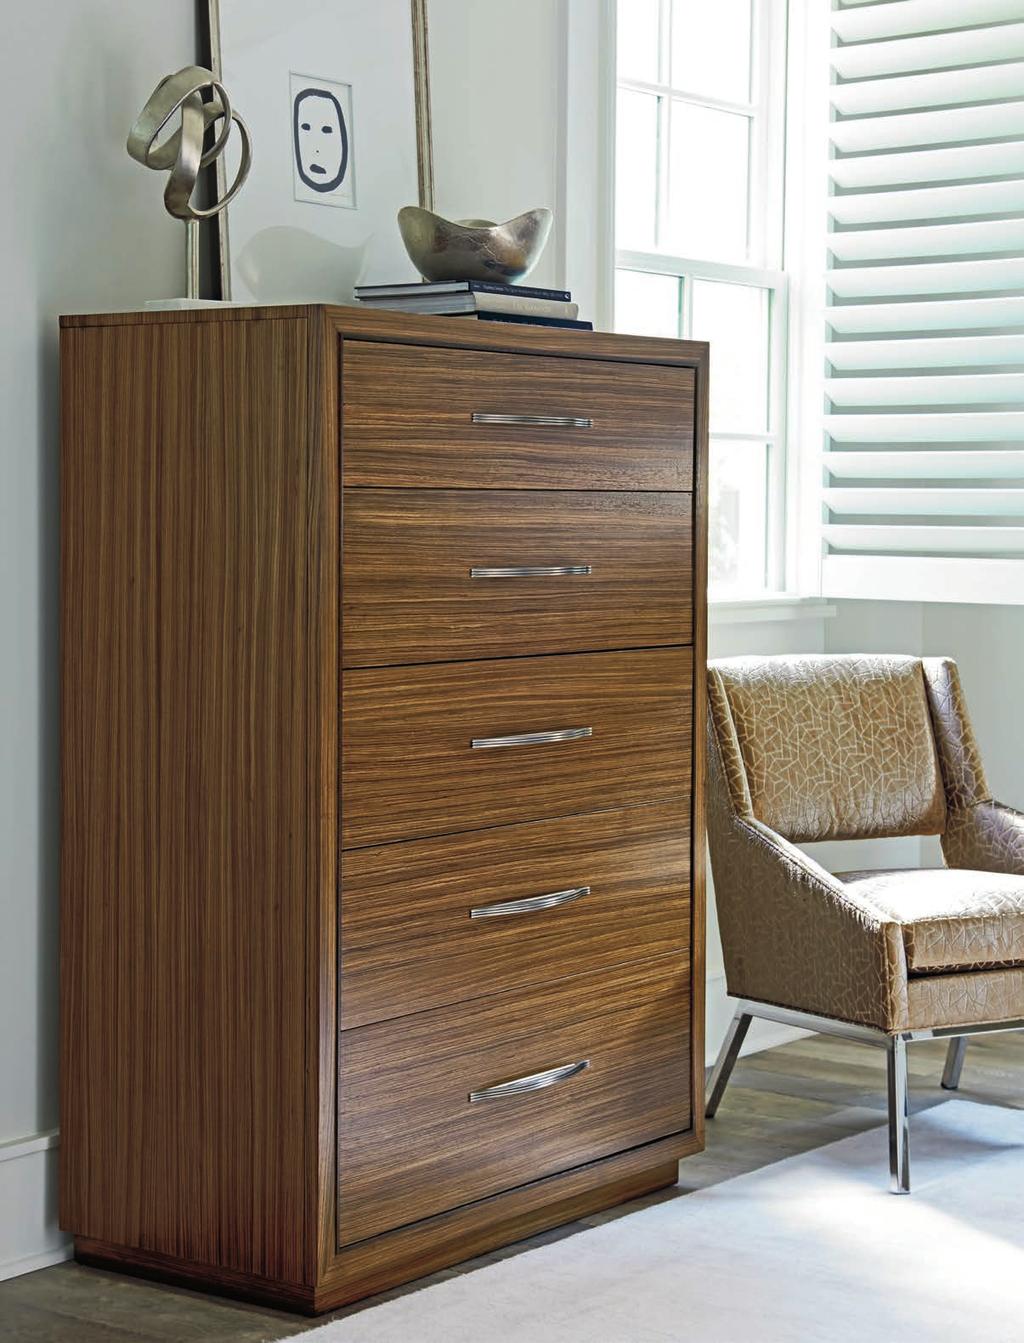 The 68-inch Haydon dresser and 5-drawer Minton chest on the opposite page showcase the long, elegant grain lines of